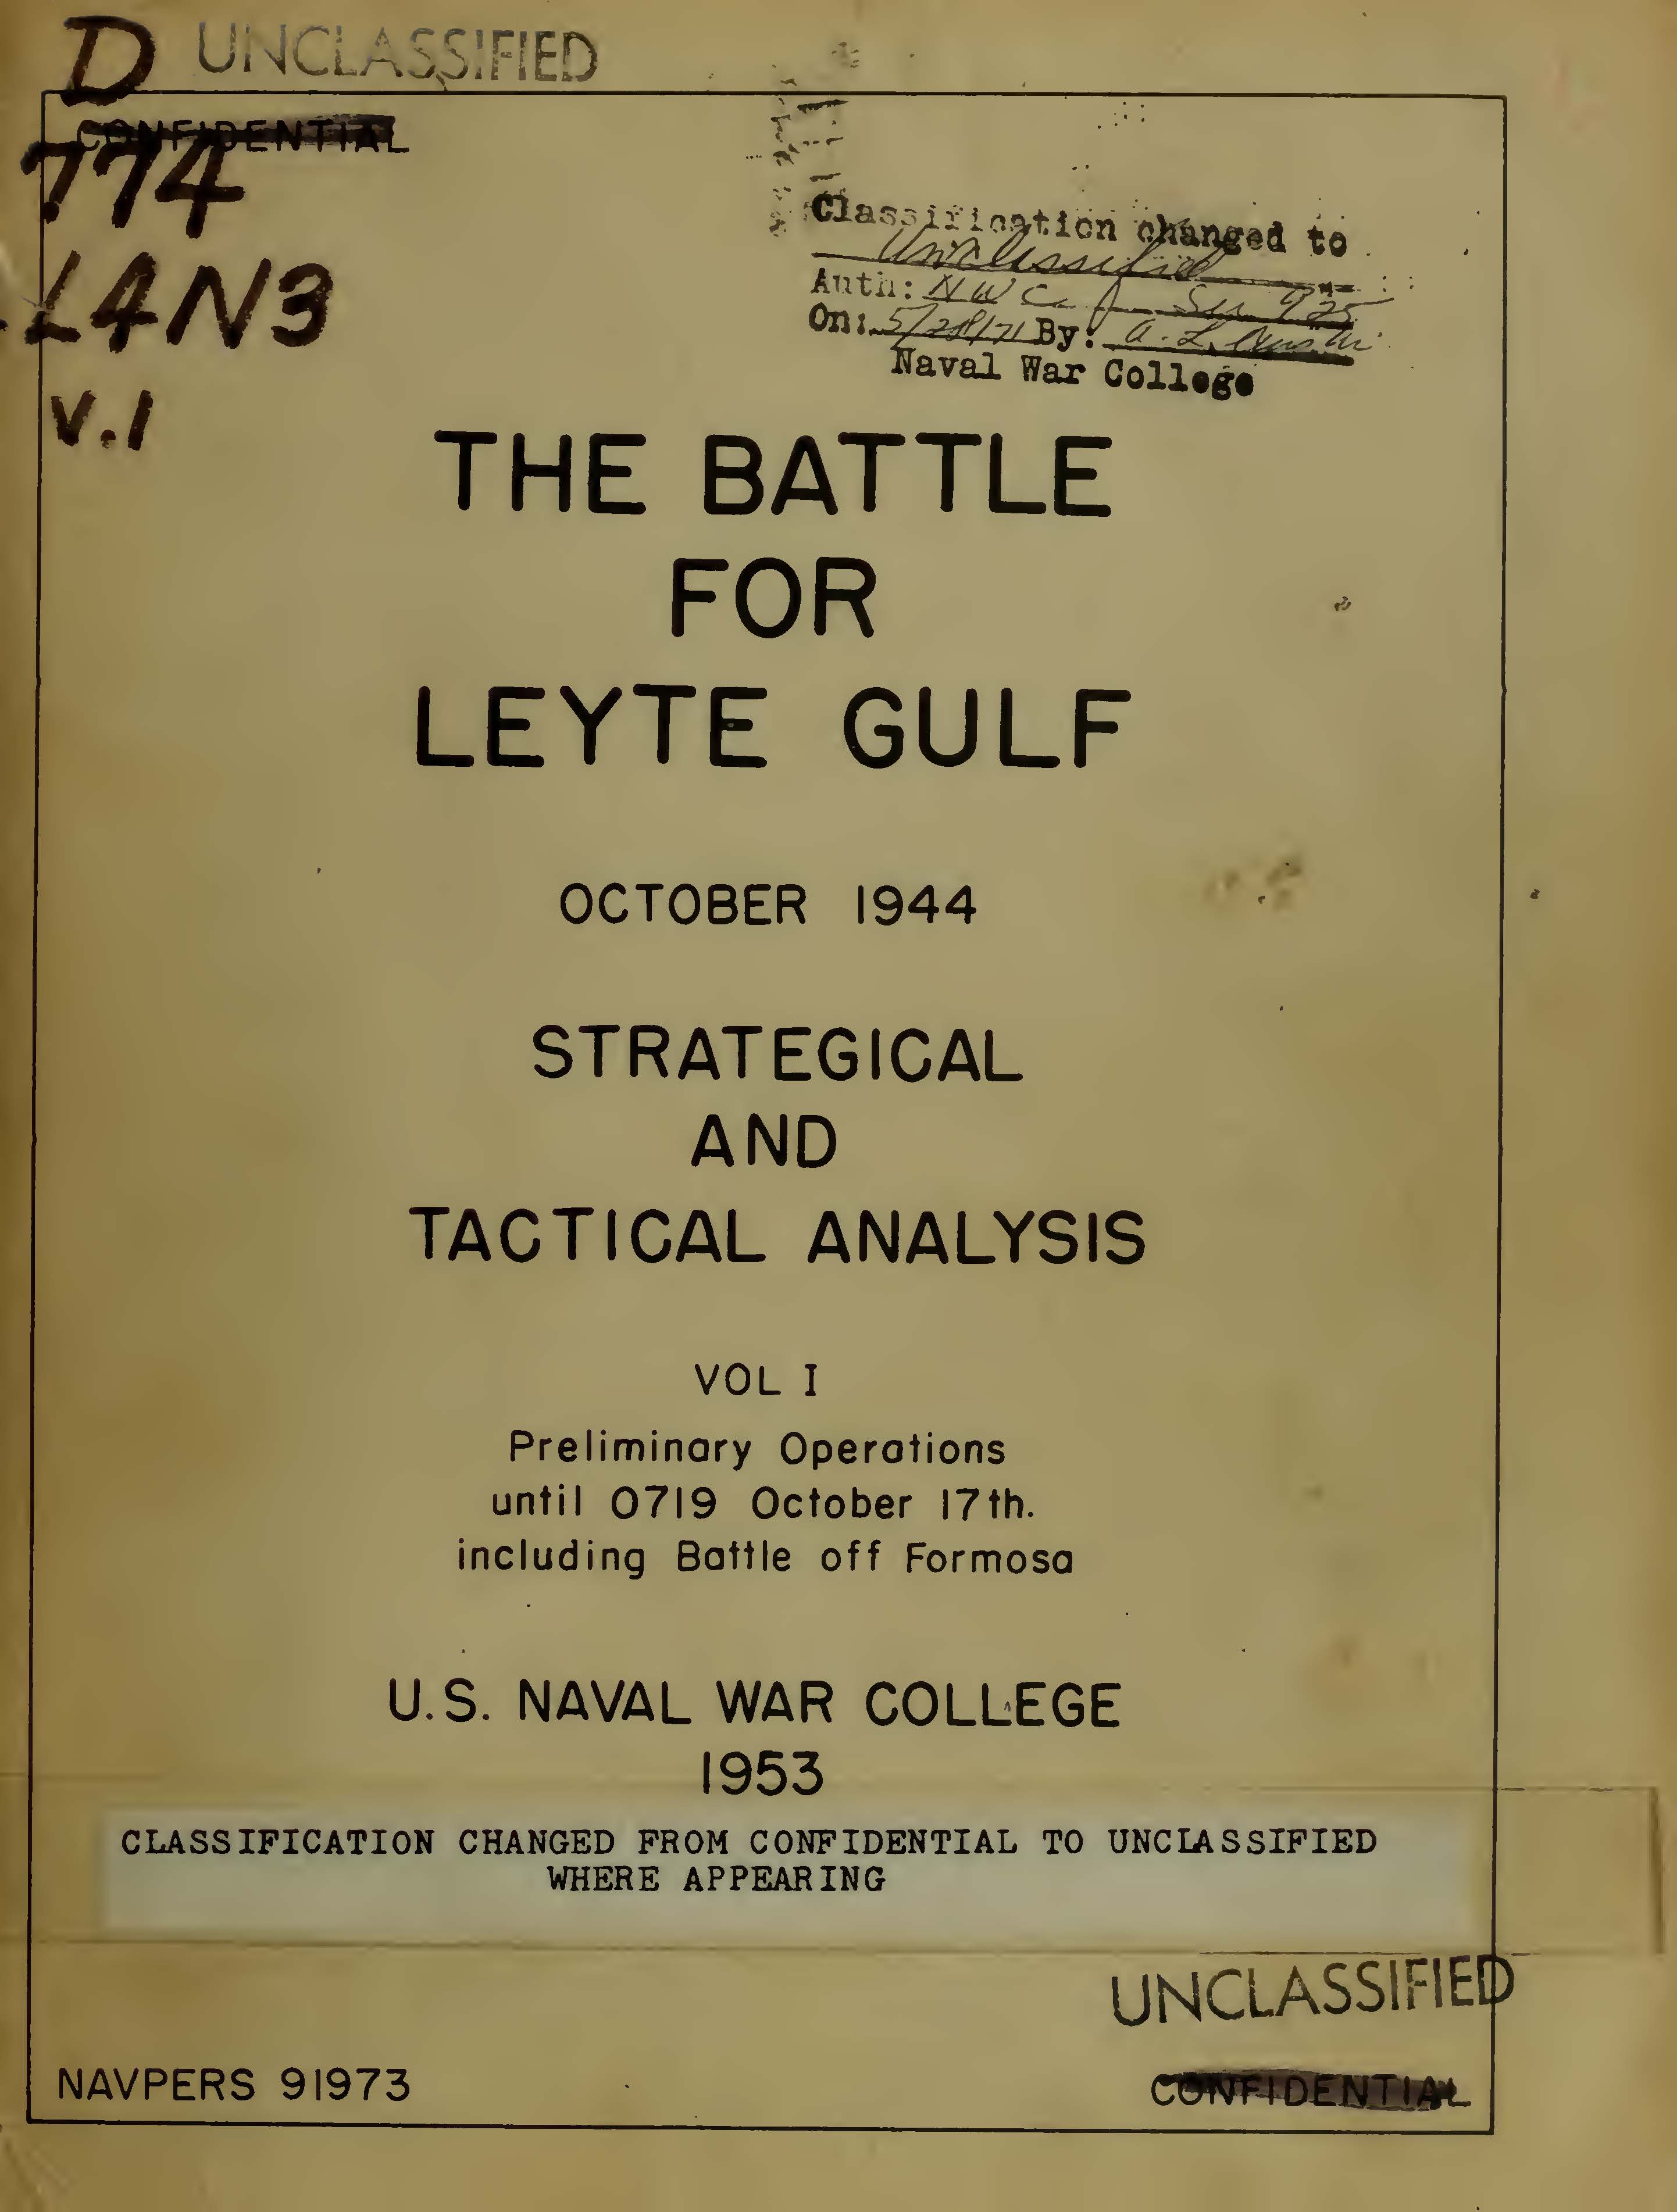 Battle for Leyte Gulf, October 1944: Strategical and Tactical Analysis. Volume I, 1953